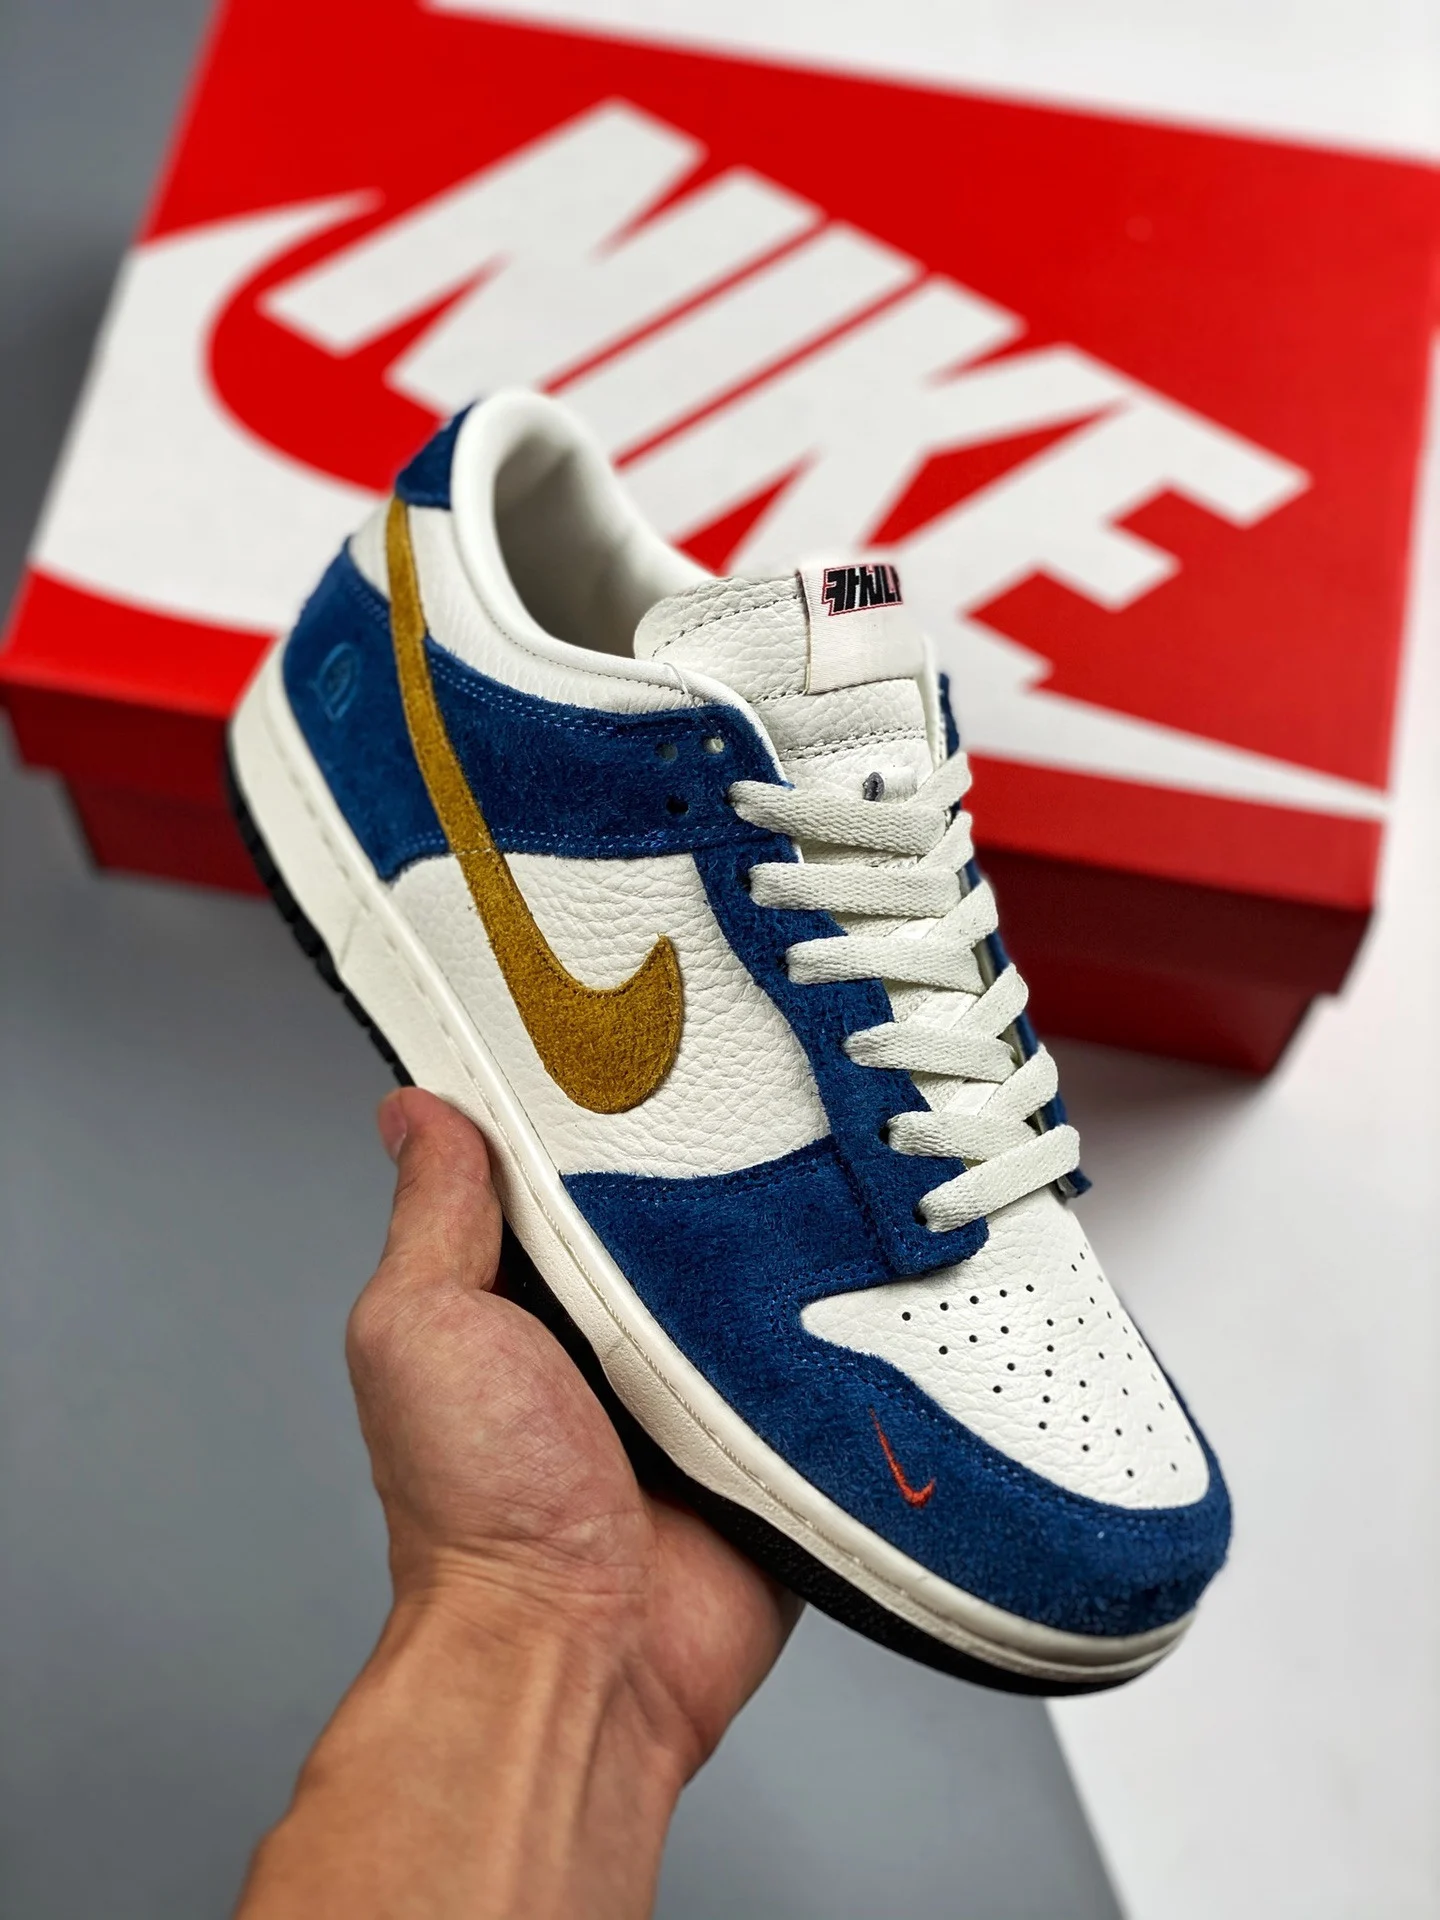 Kasina x Nike Dunk Low Sail University Gold-Industrial Blue For Sale